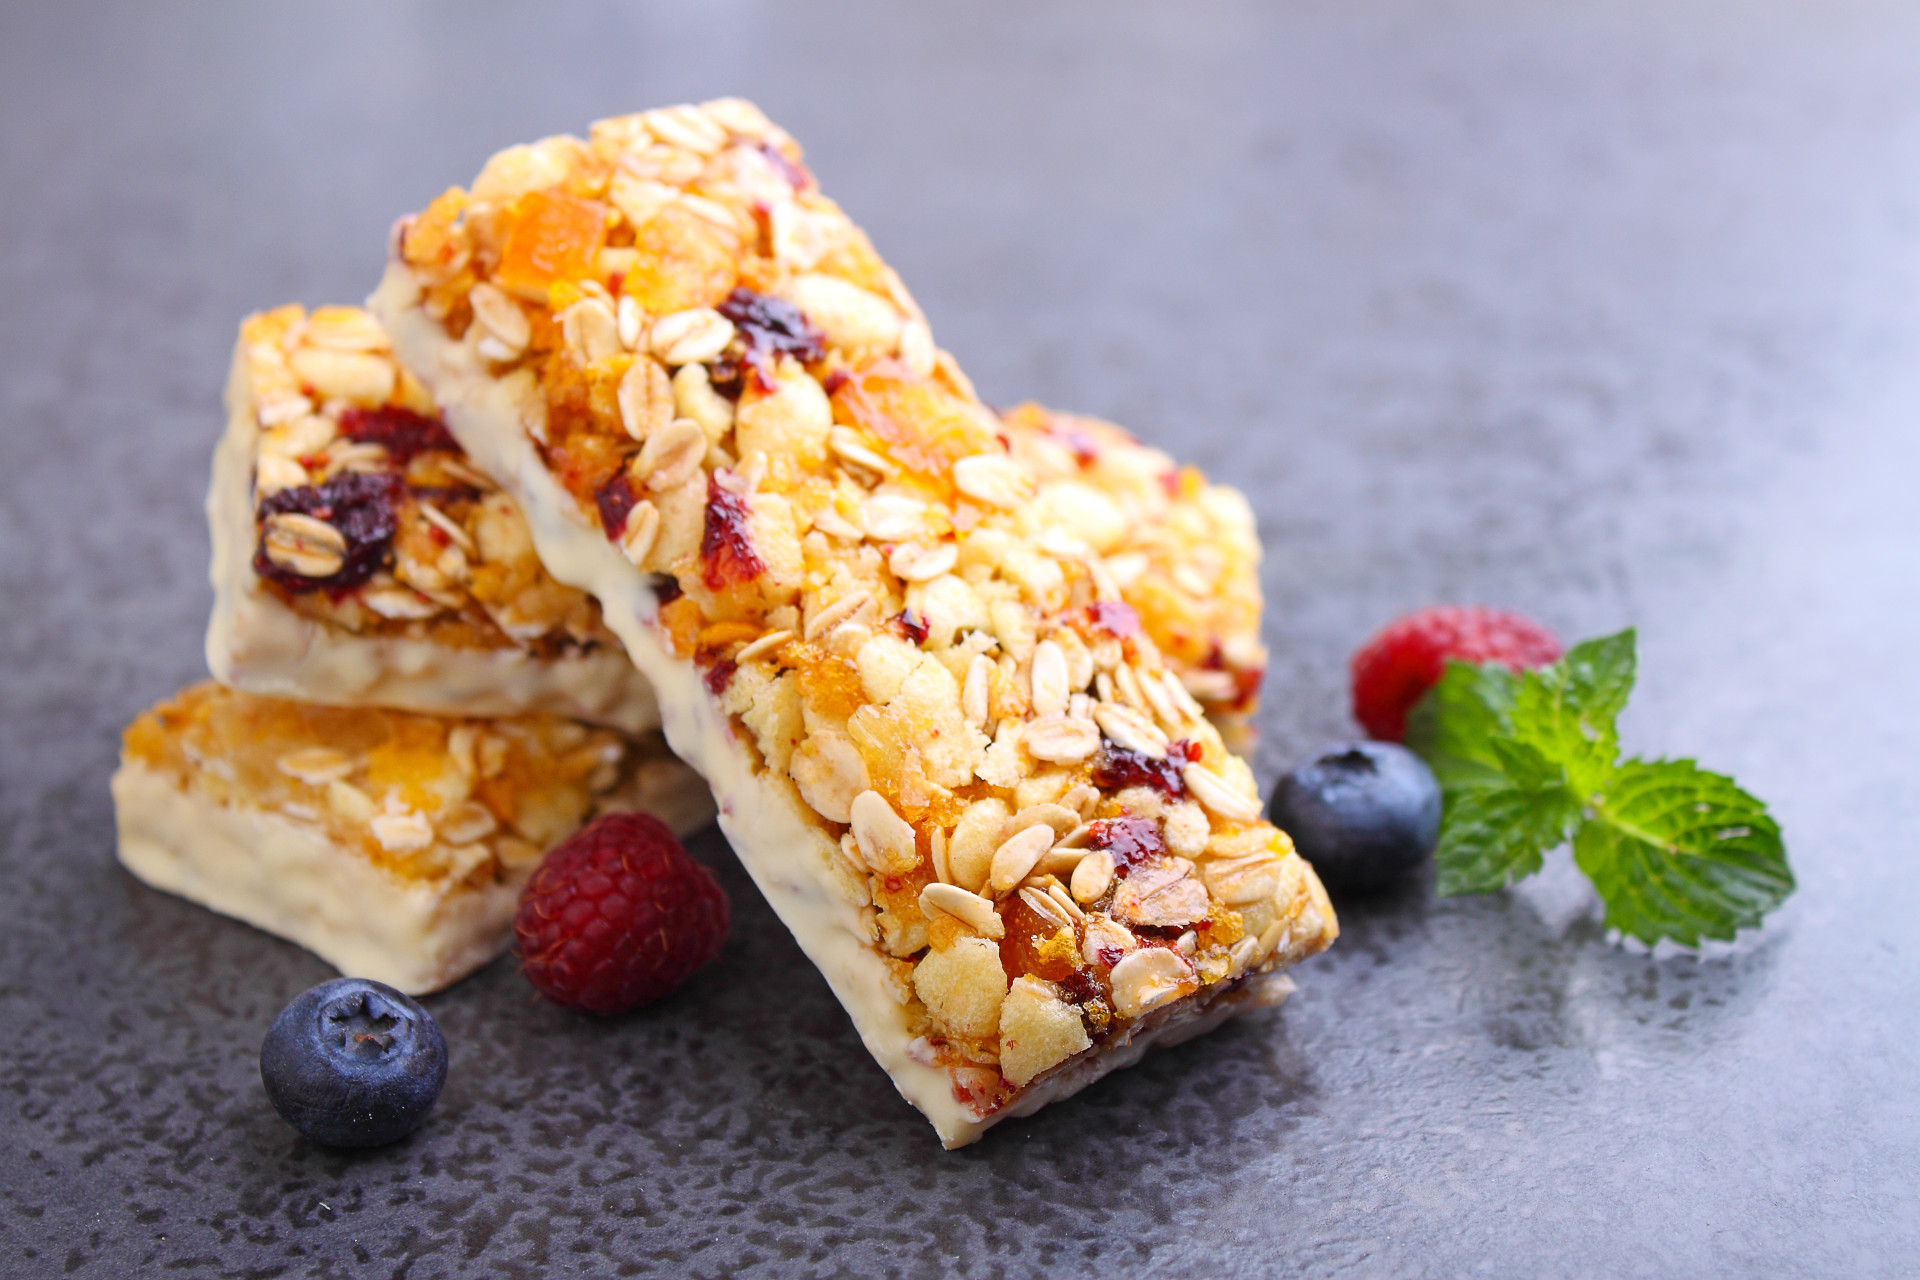 The best bet for last-minute packers are ready-made healthy granola bars full of nuts, grains, and natural sweets.<p>You may also like:<a href="https://www.starsinsider.com/n/418496?utm_source=msn.com&utm_medium=display&utm_campaign=referral_description&utm_content=356024v3en-us"> Quinton Aaron and more inspiring celeb weight loss transformations</a></p>